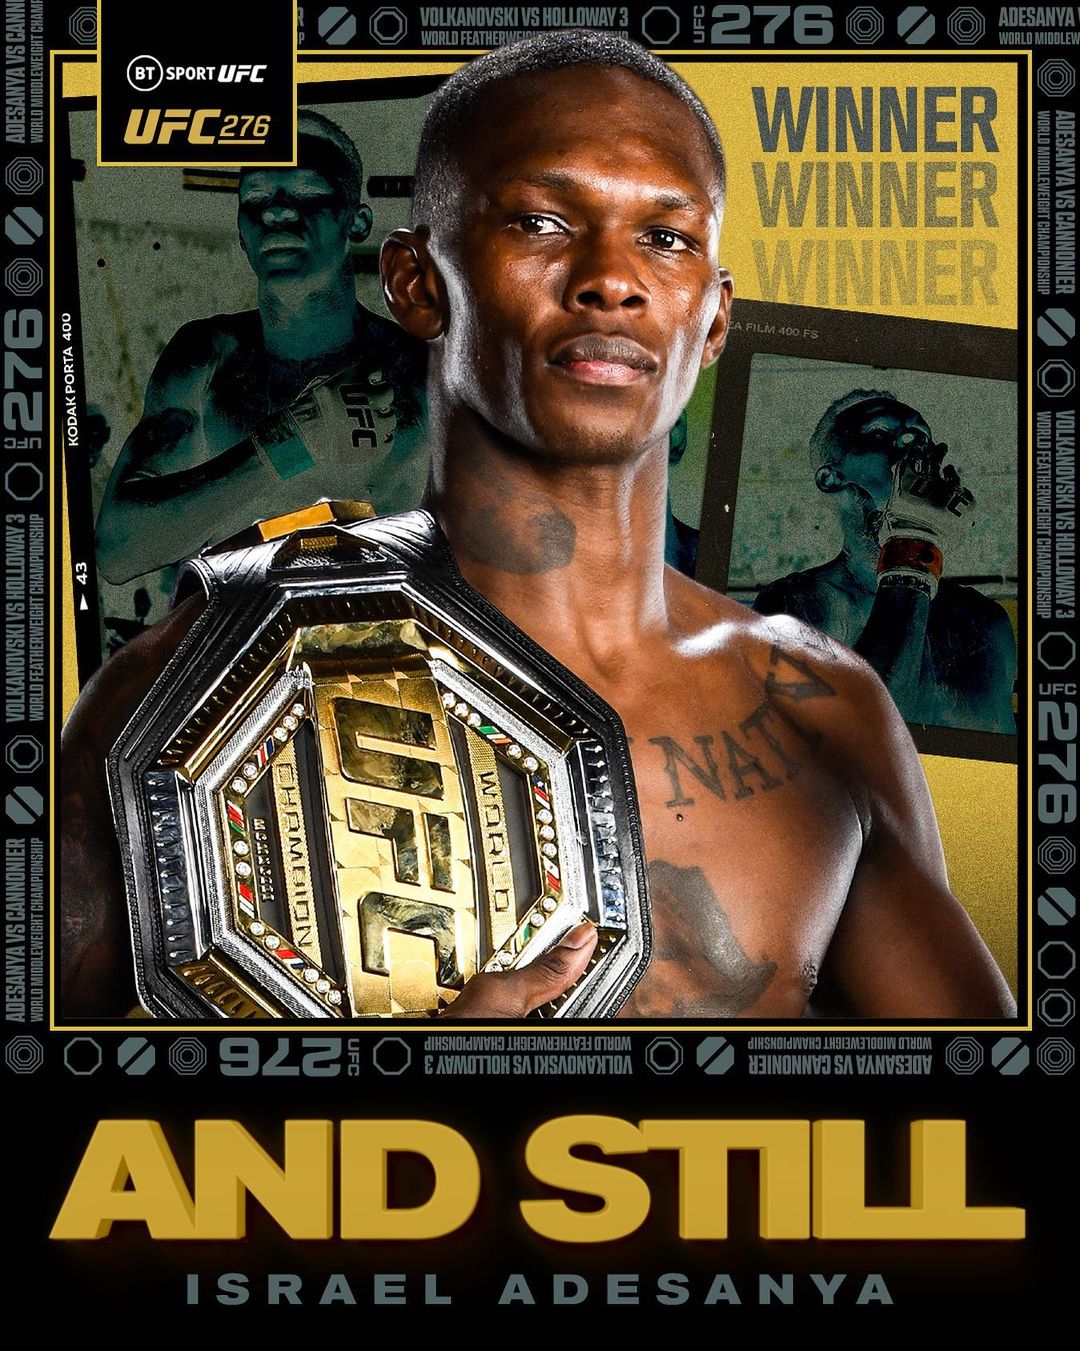 Israel Adesanya survives Drake curse with victory against Jared Cannonier